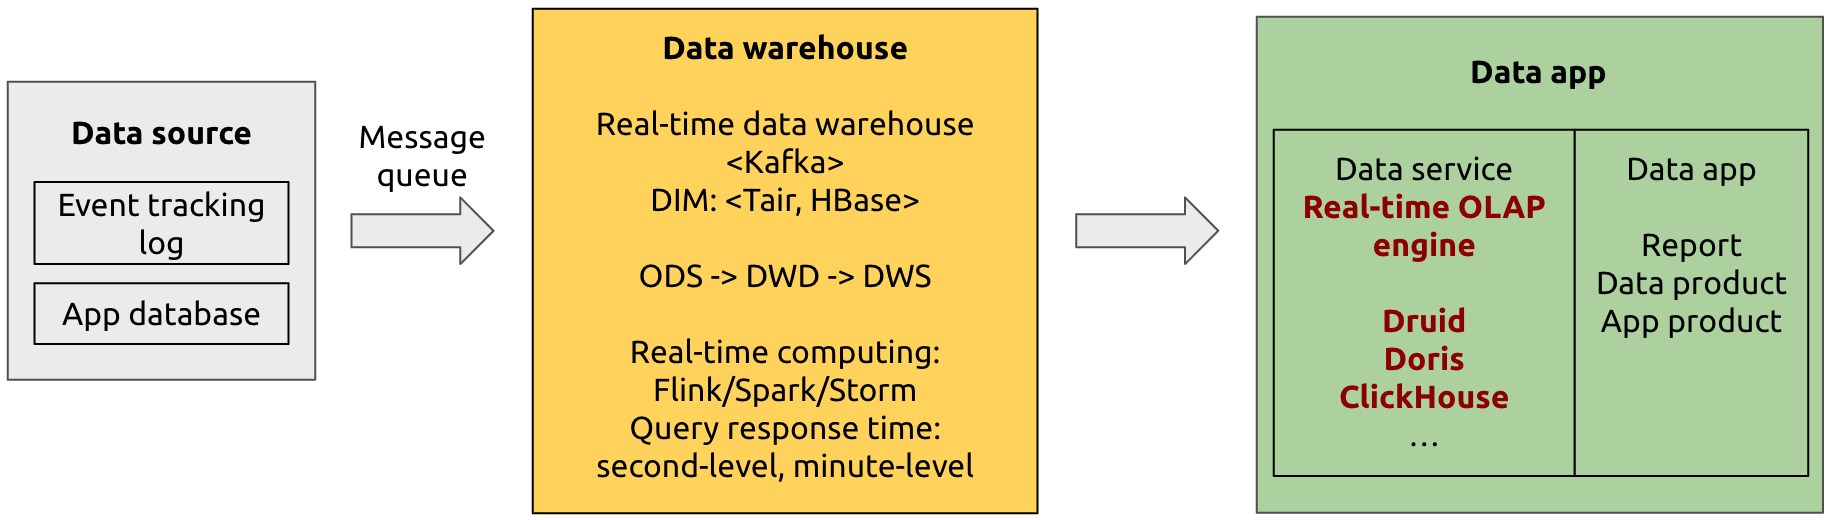 Real-time OLAP variant architecture